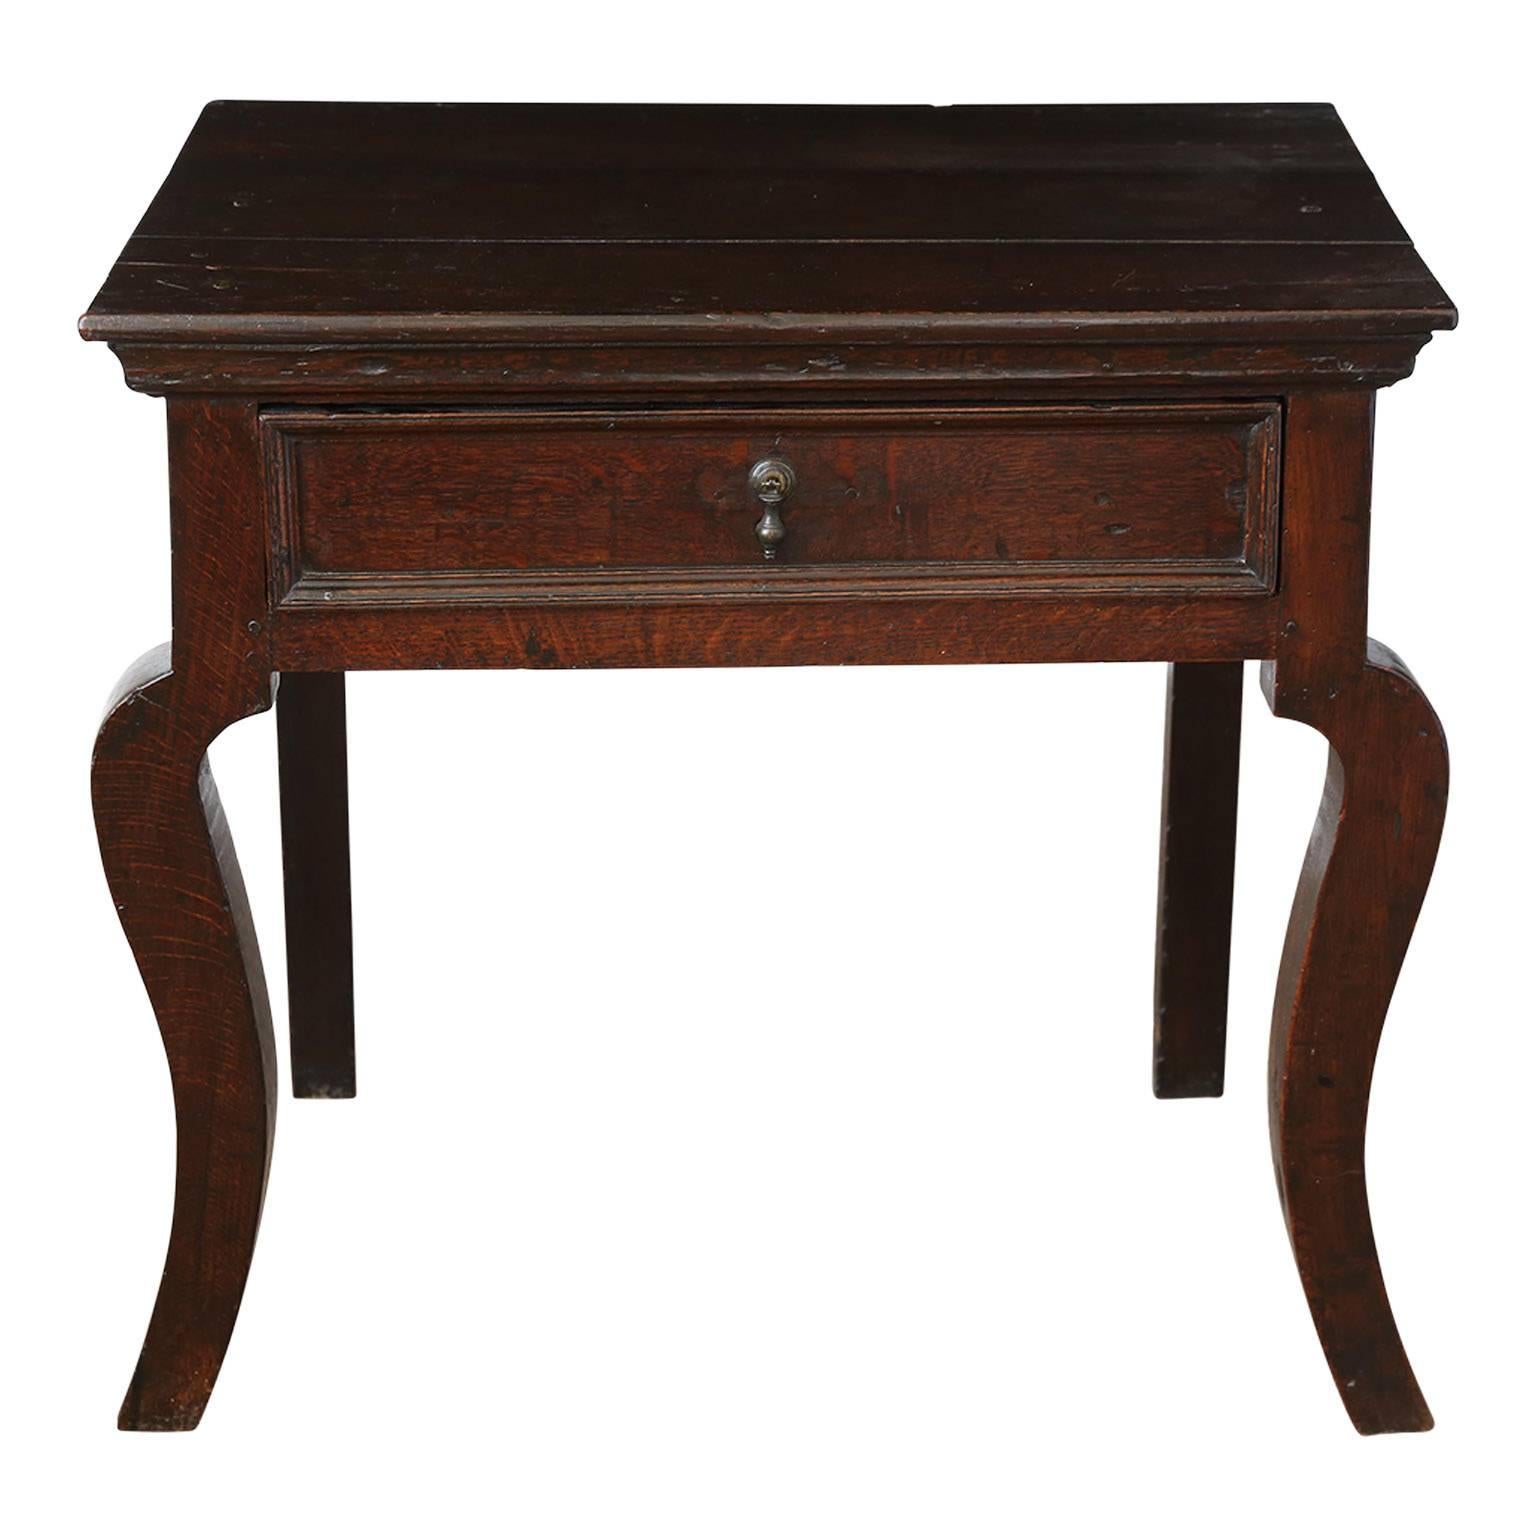 Hand-Carved Brown English Oak Side Table with Single Drawer